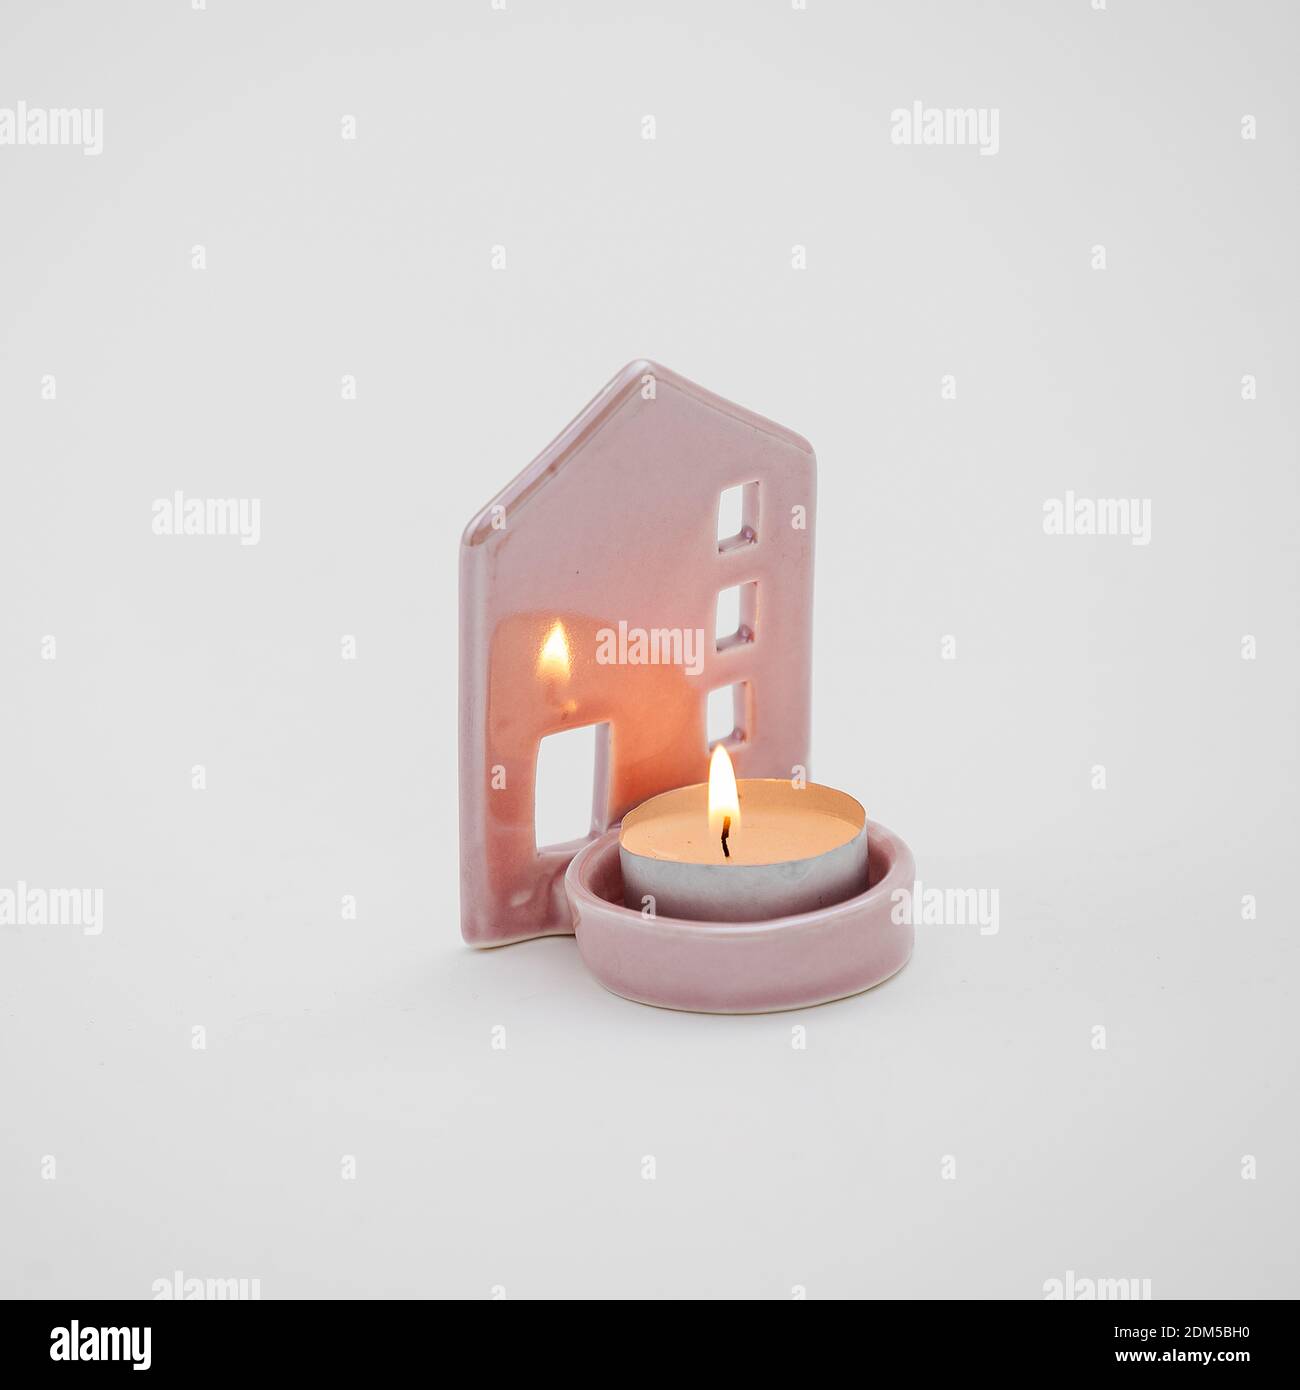 Ceramic Candle Holder High Resolution Stock Photography and Images - Alamy